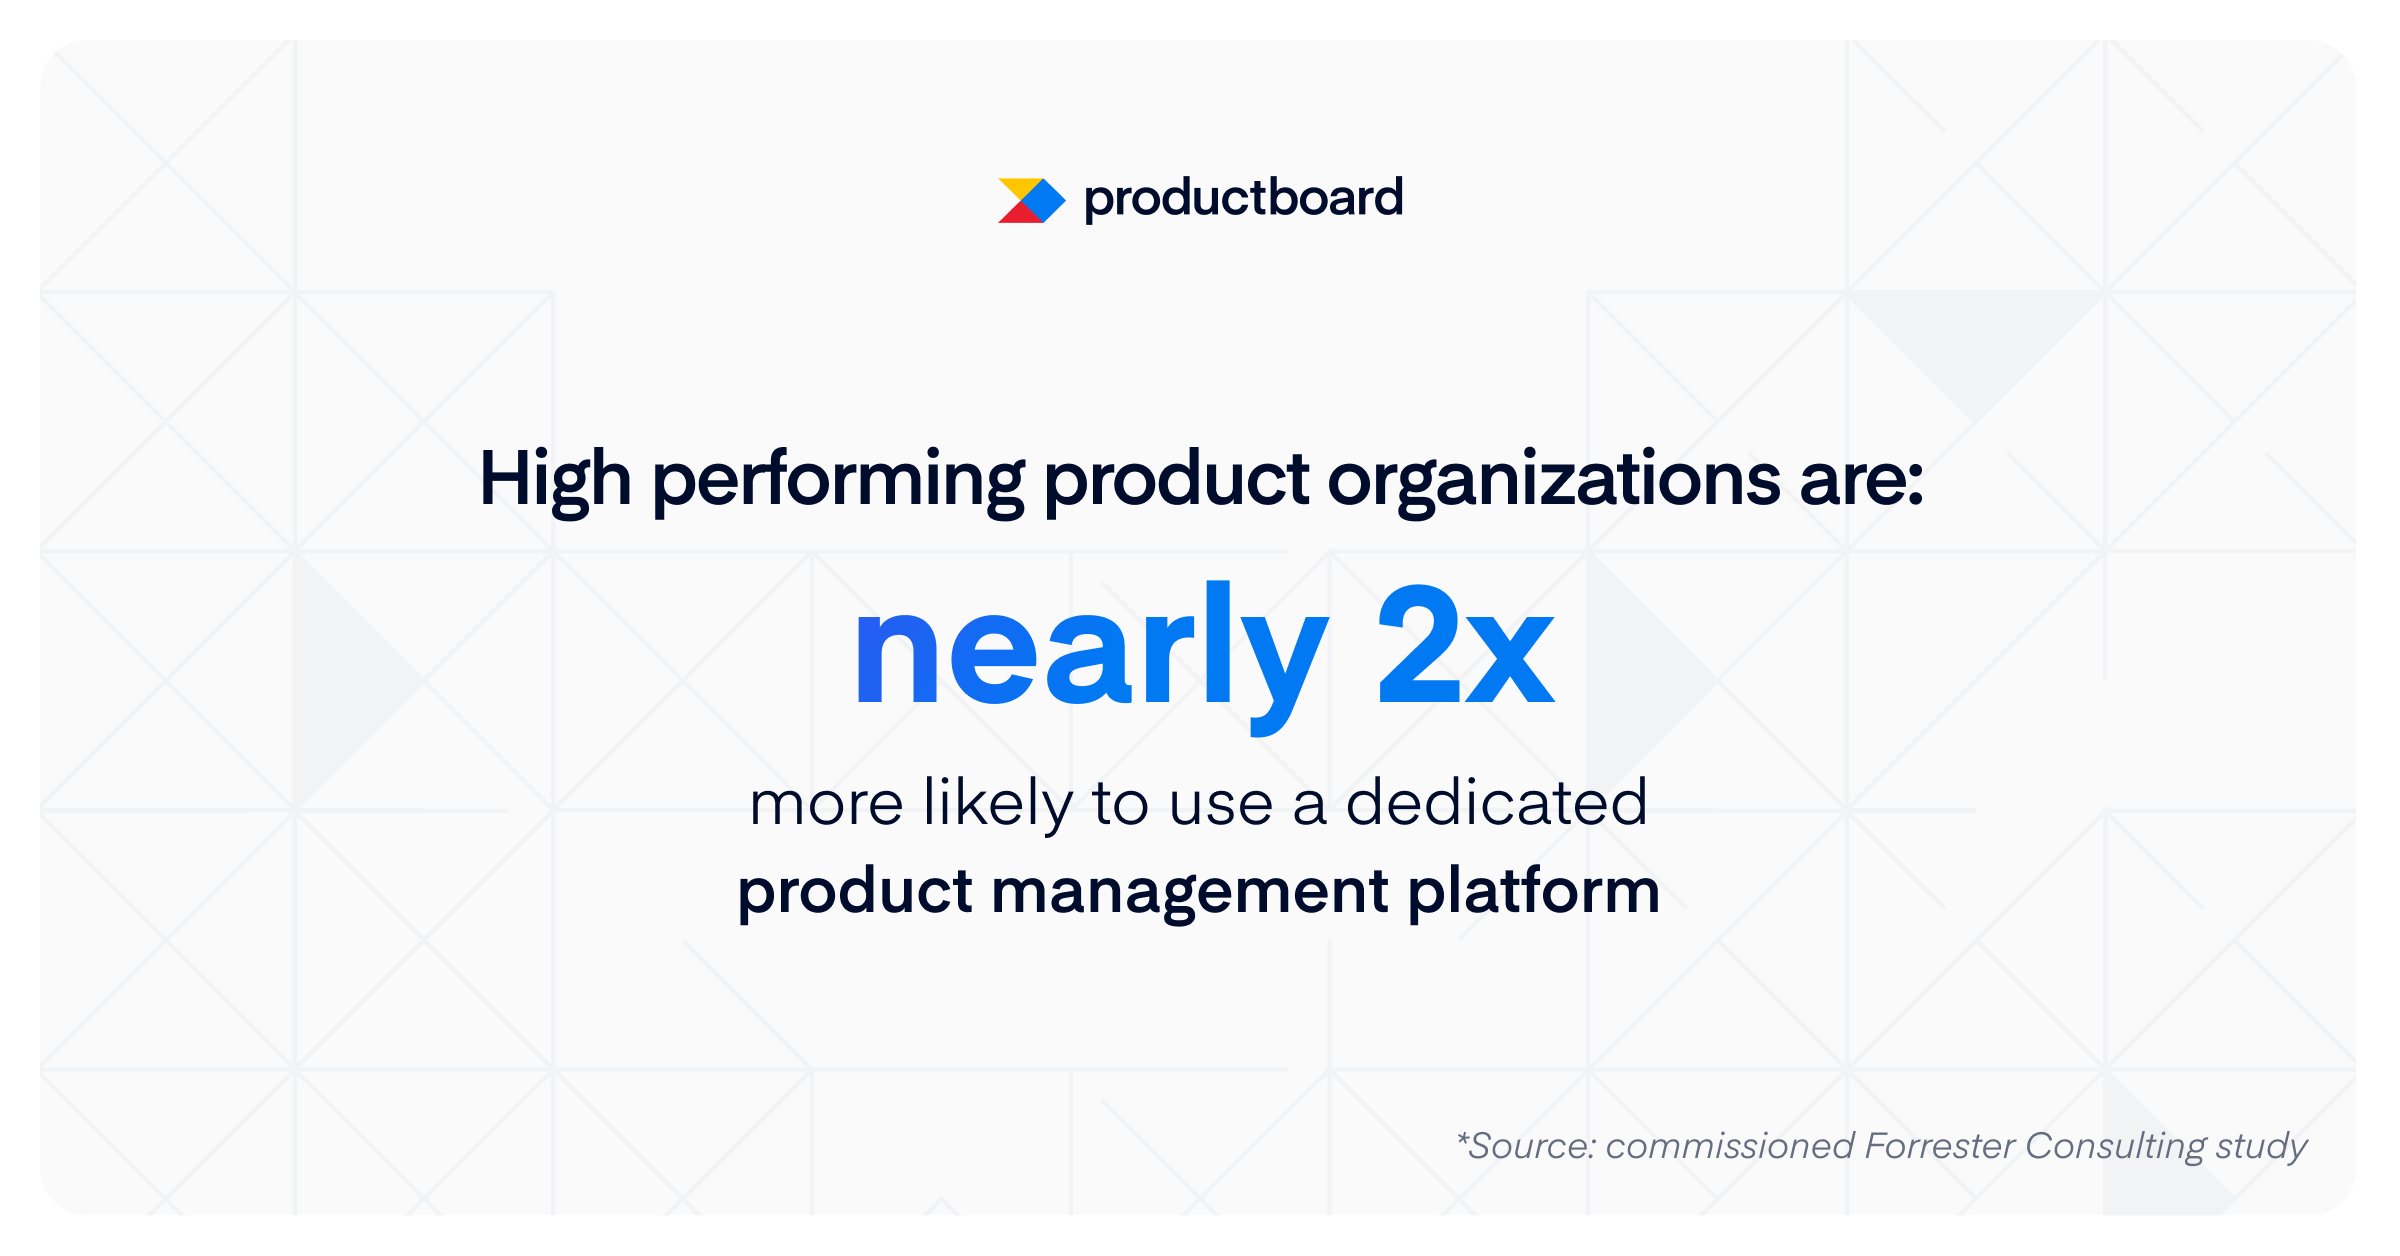 High performing product organizations are two times more likely to use a dedicated product management platform